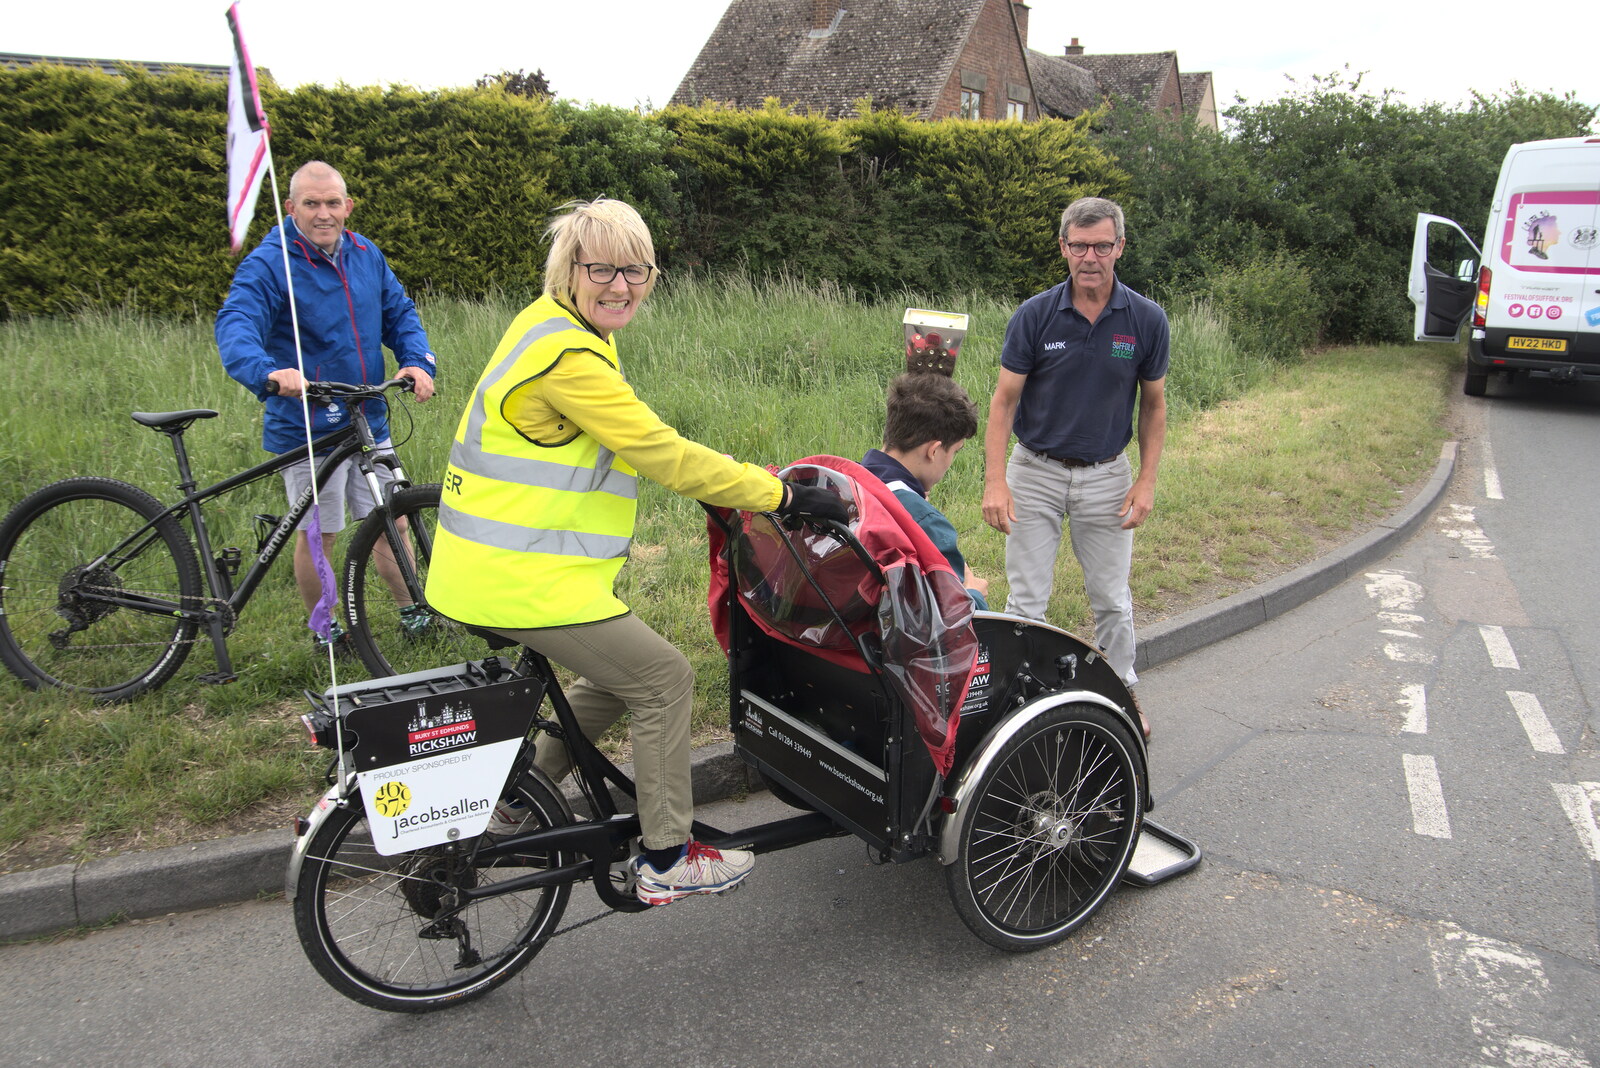 All stop as Jack is dropped off in Lower Oakley from The Jubilee Torch Run, Brome and Oakley, Suffolk - 25th May 2022